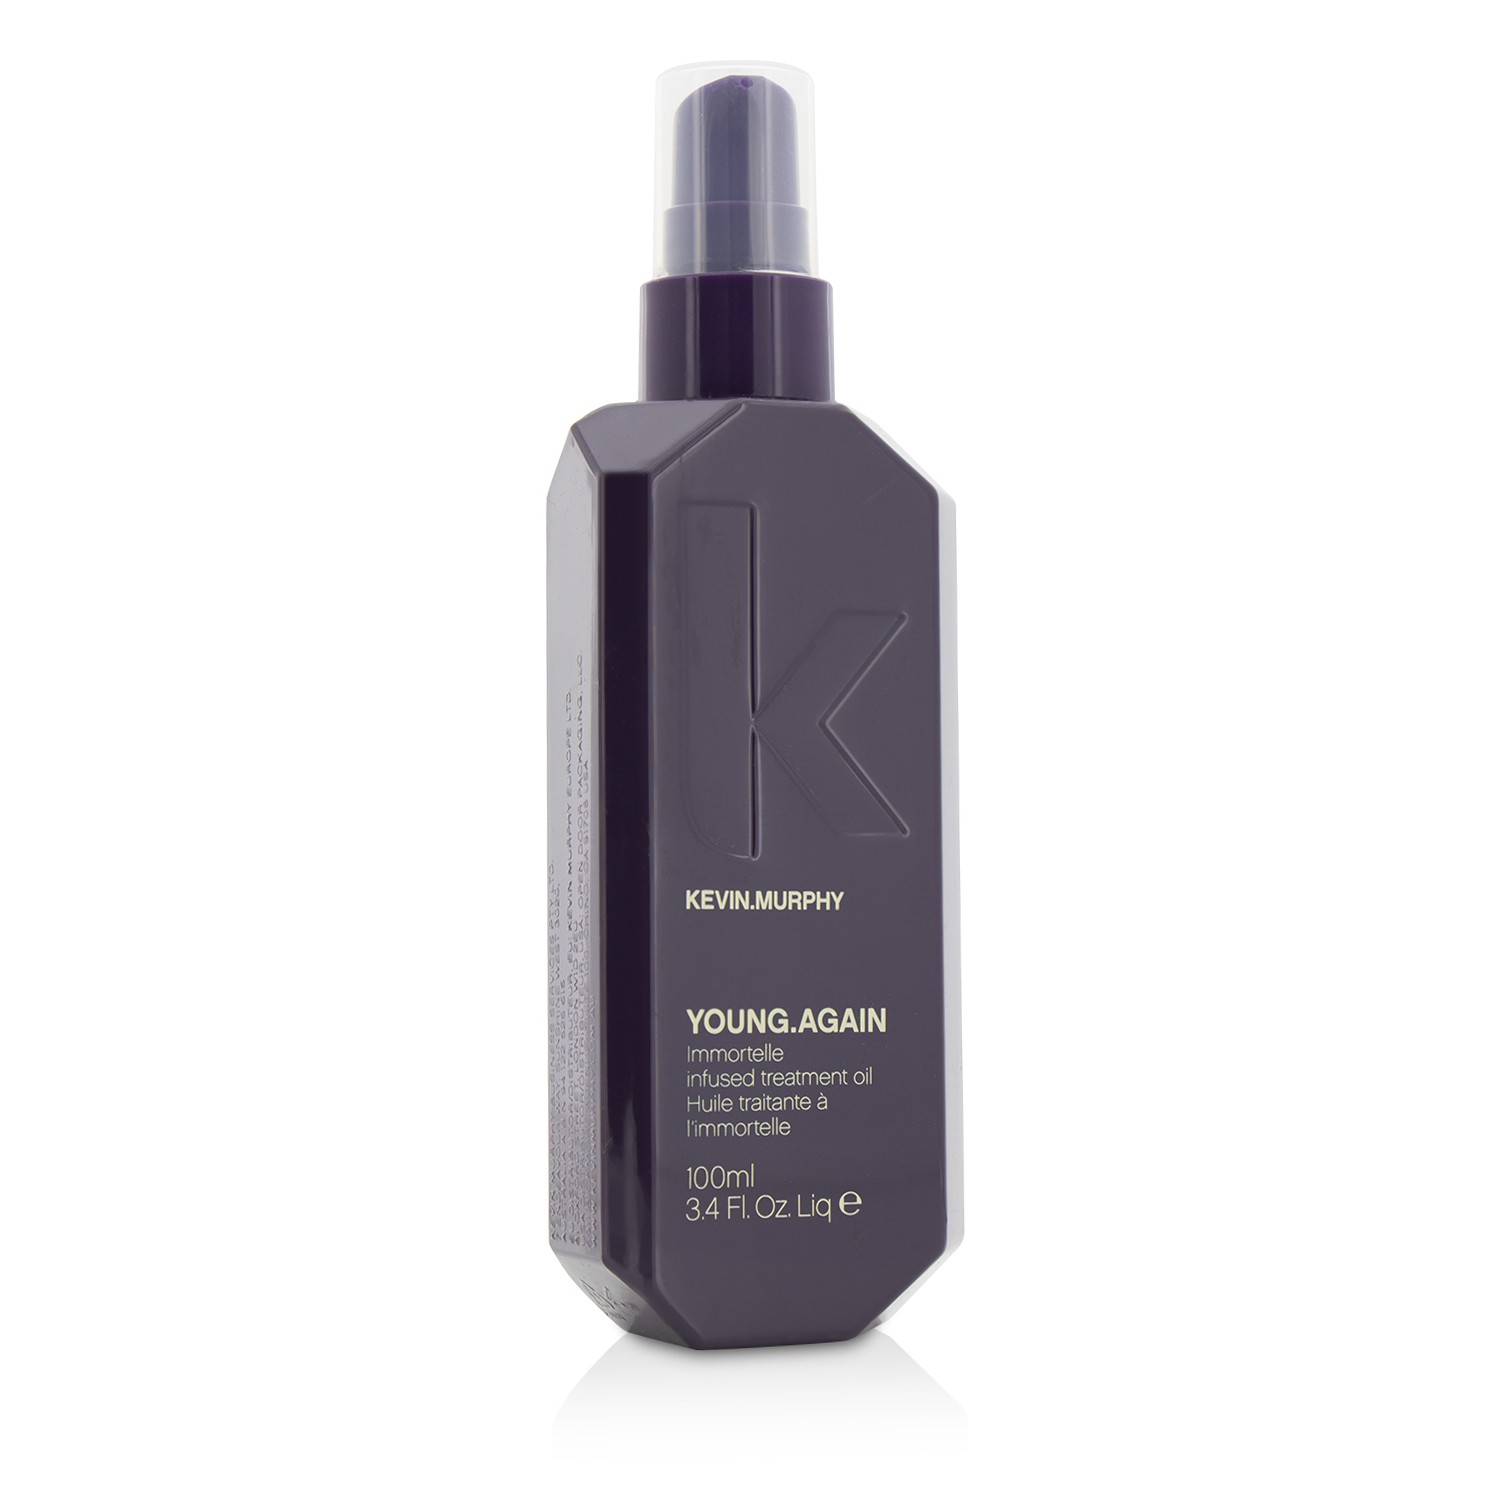 Young.Again (Immortelle Infused Treatment Oil) Kevin.Murphy Image